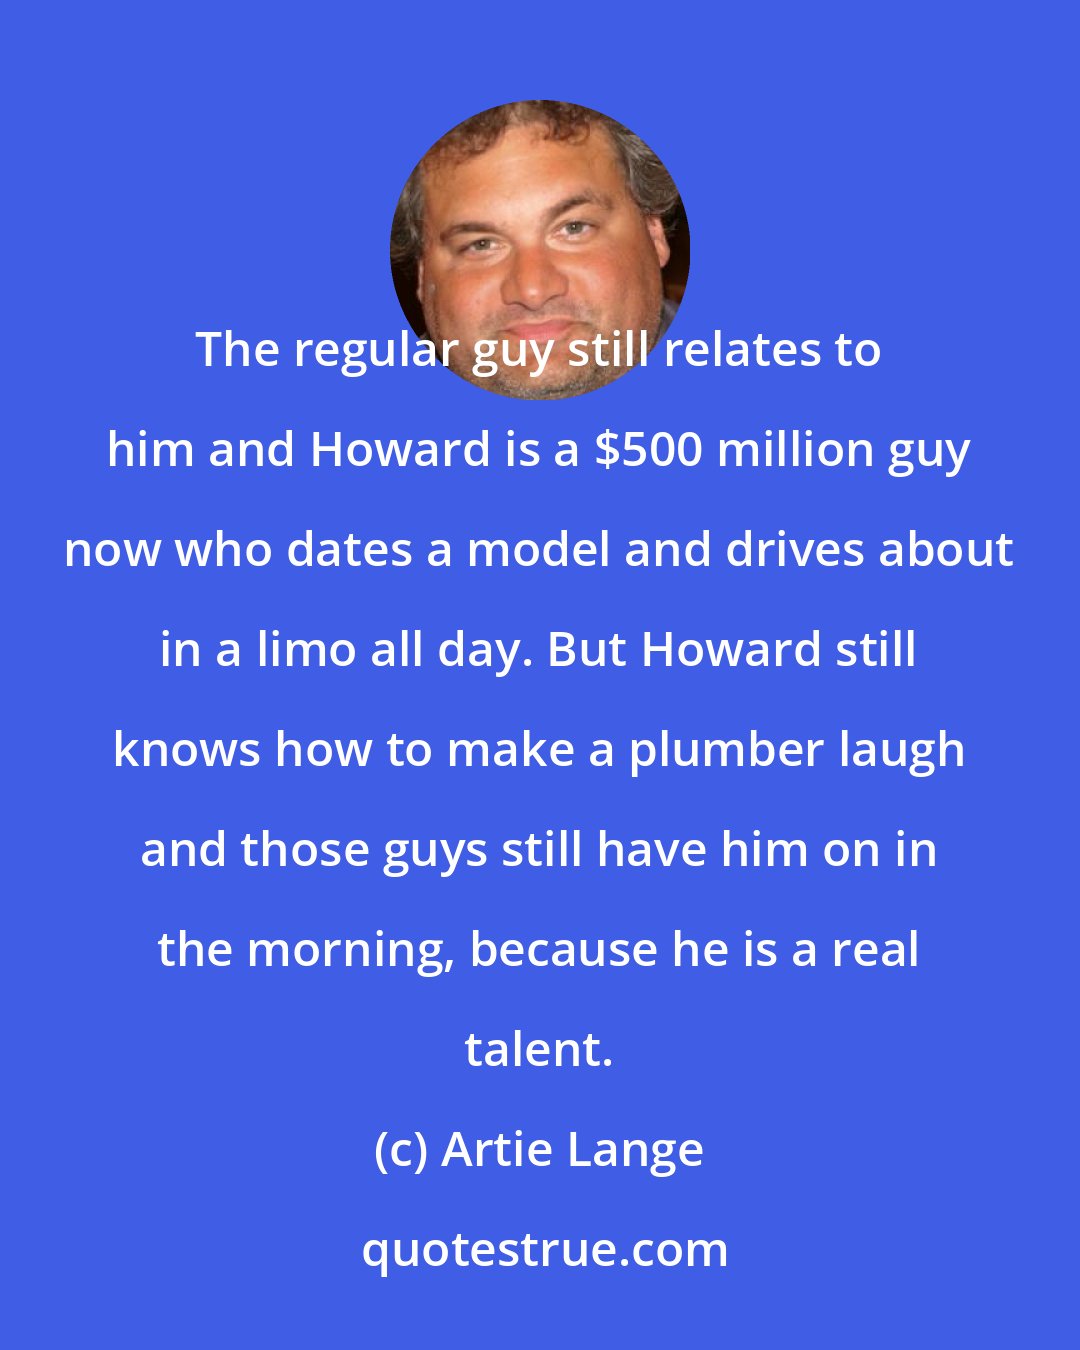 Artie Lange: The regular guy still relates to him and Howard is a $500 million guy now who dates a model and drives about in a limo all day. But Howard still knows how to make a plumber laugh and those guys still have him on in the morning, because he is a real talent.